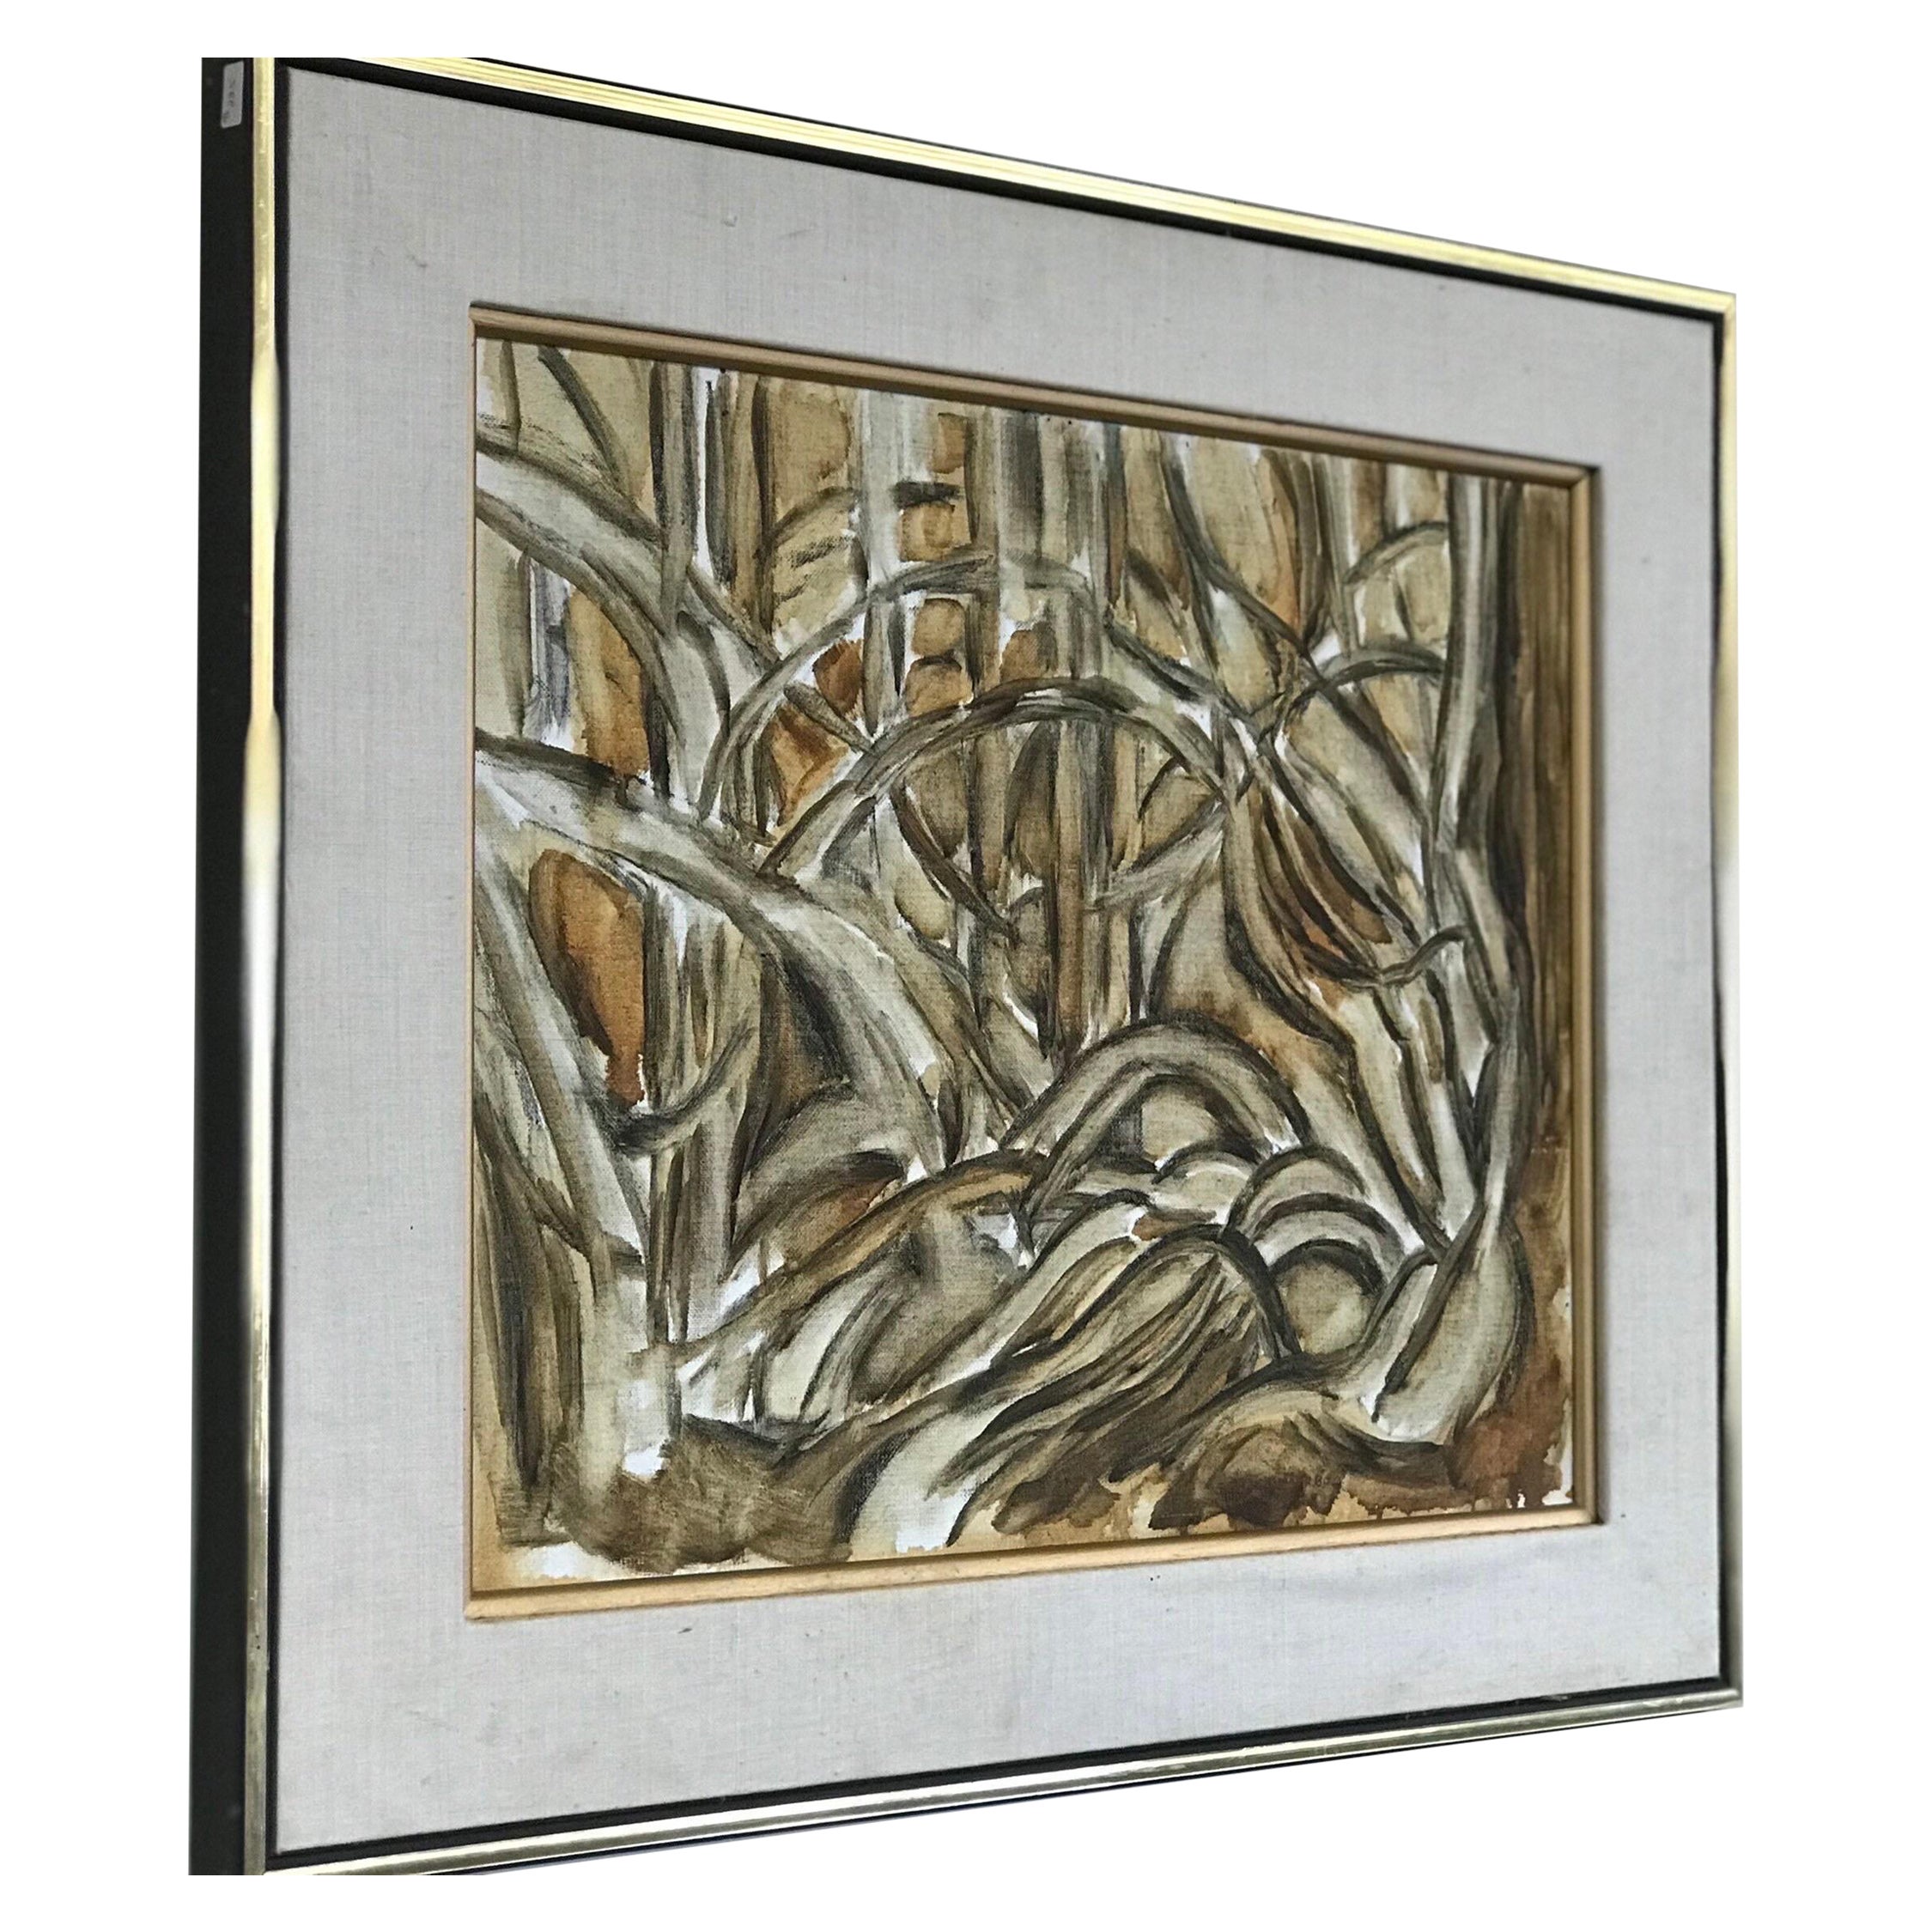 Vintage Mid-Century Modern Oil Painting Golden Tones Abstract Primitive Framed